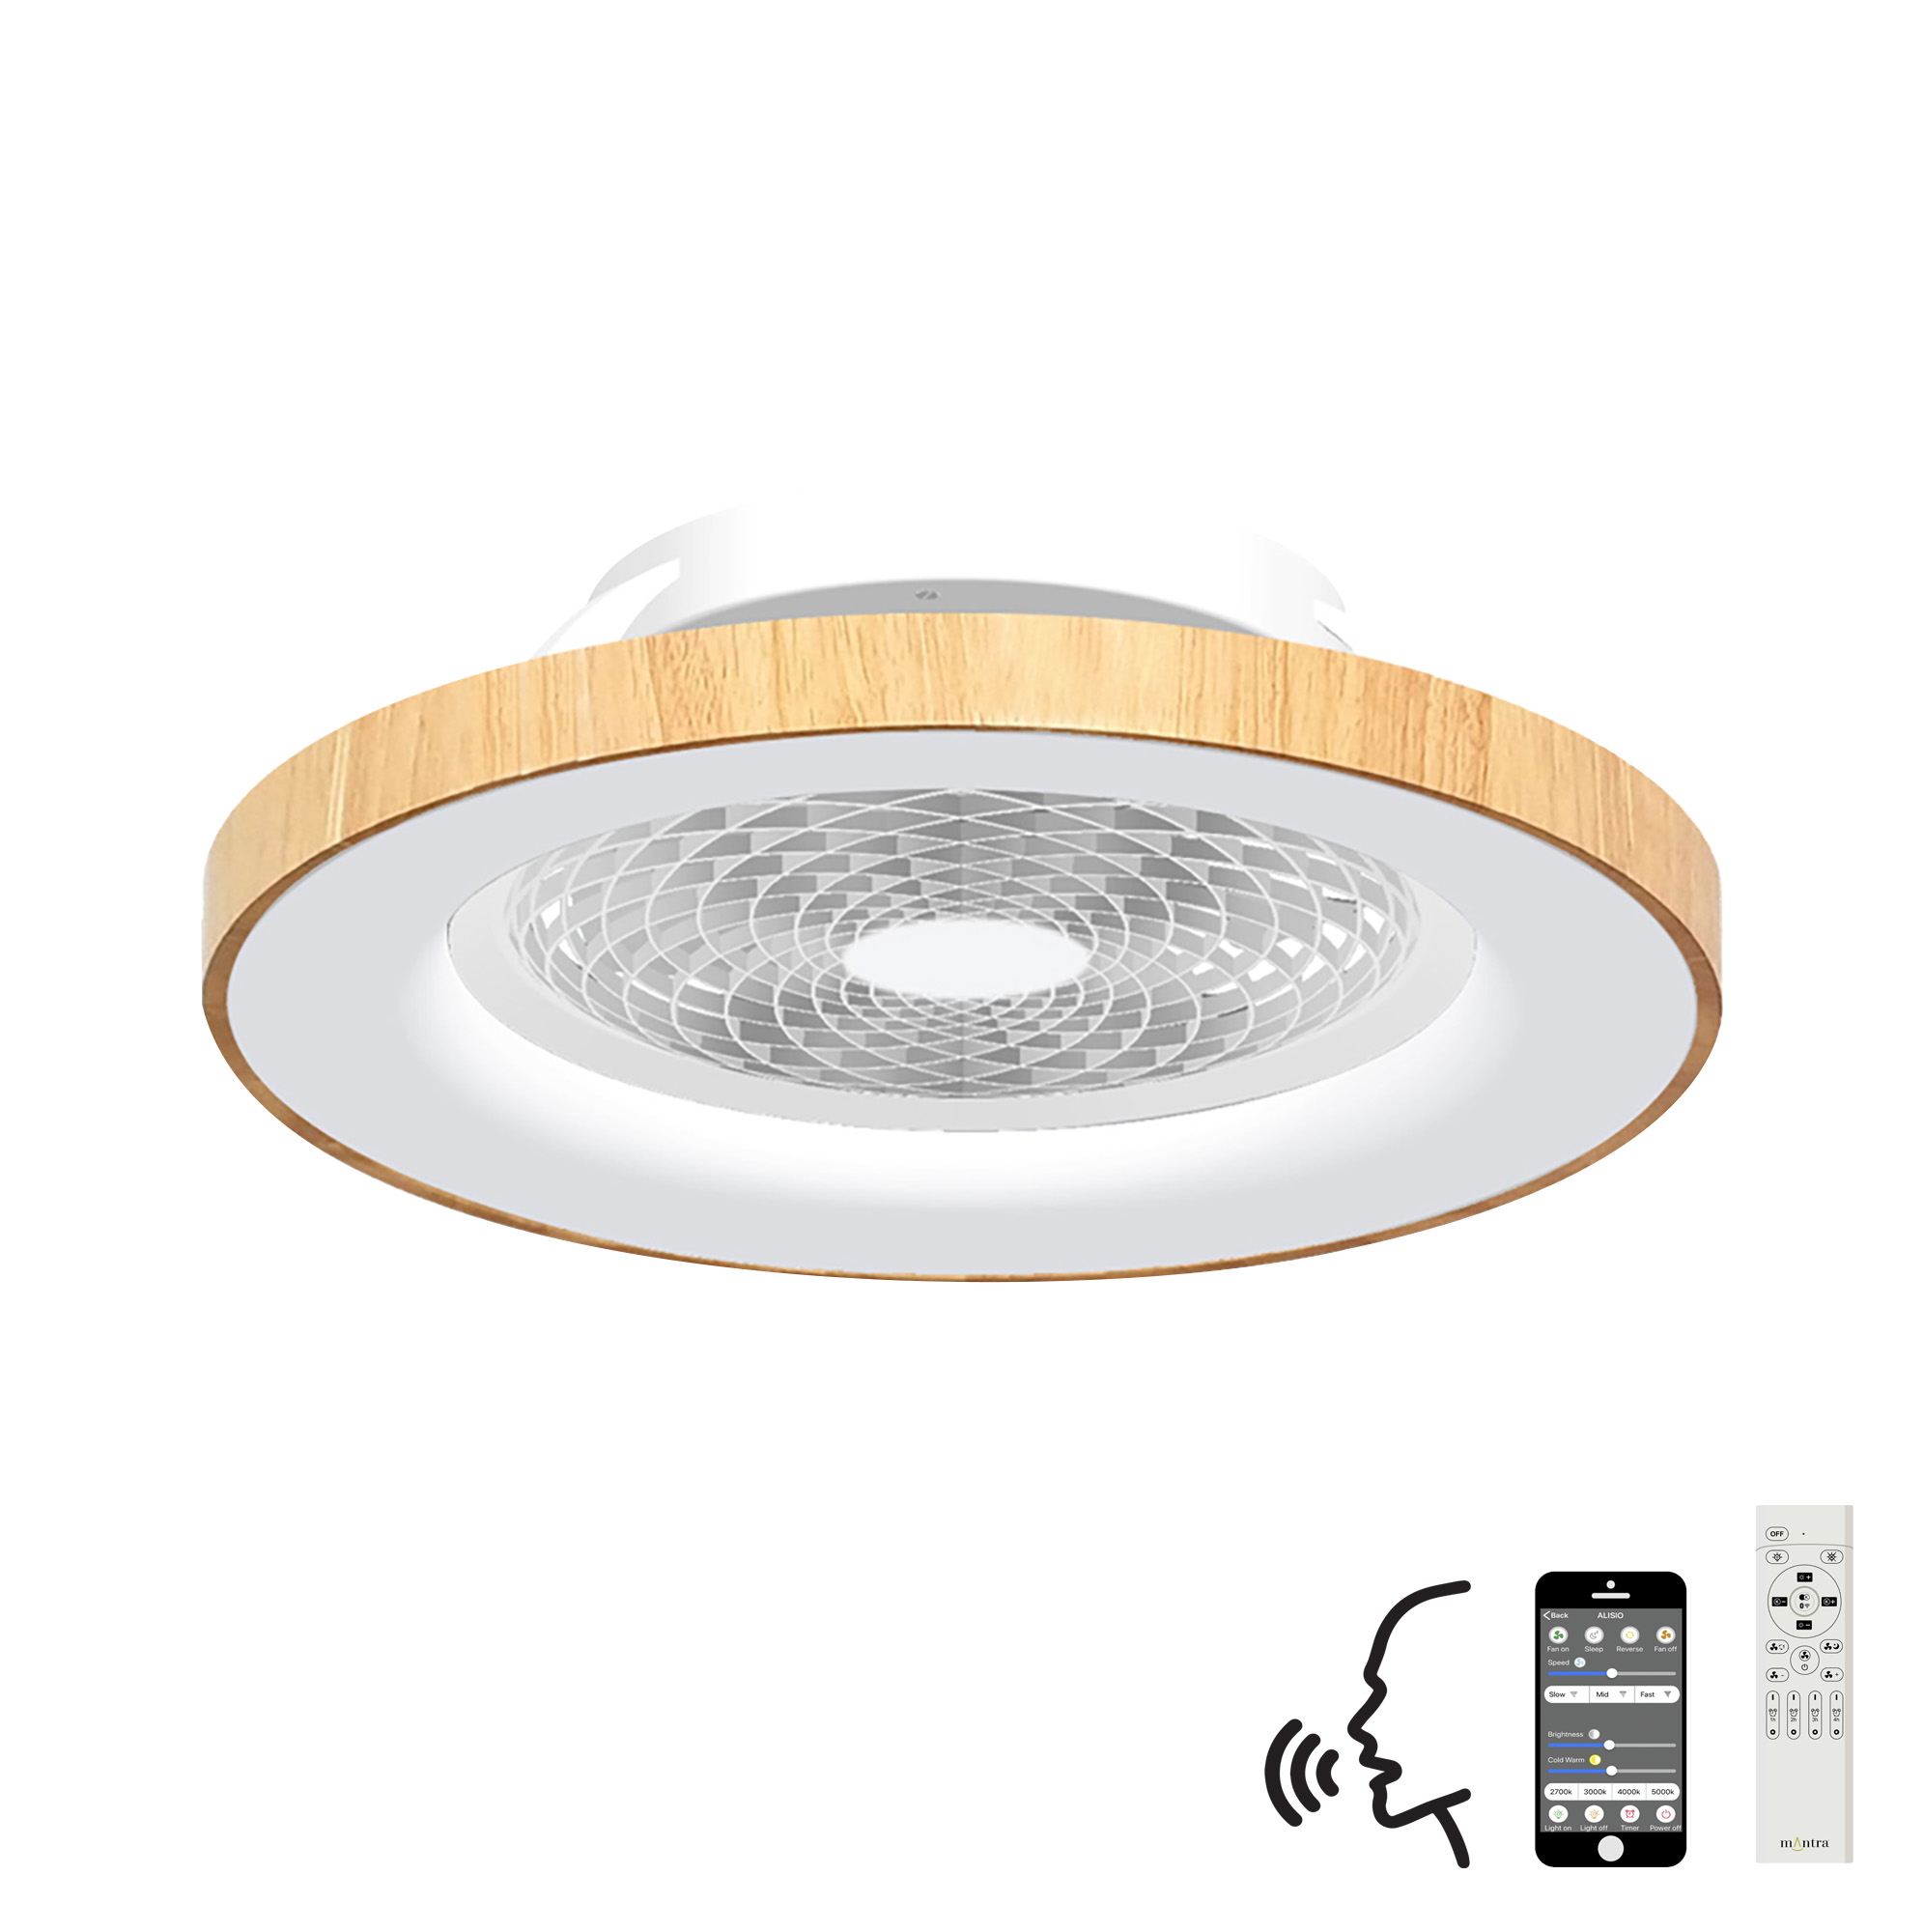 M7126  Tibet 70W LED Dimmable Ceiling Light & Fan; Remote / APP / Voice Controlled Wood Effect